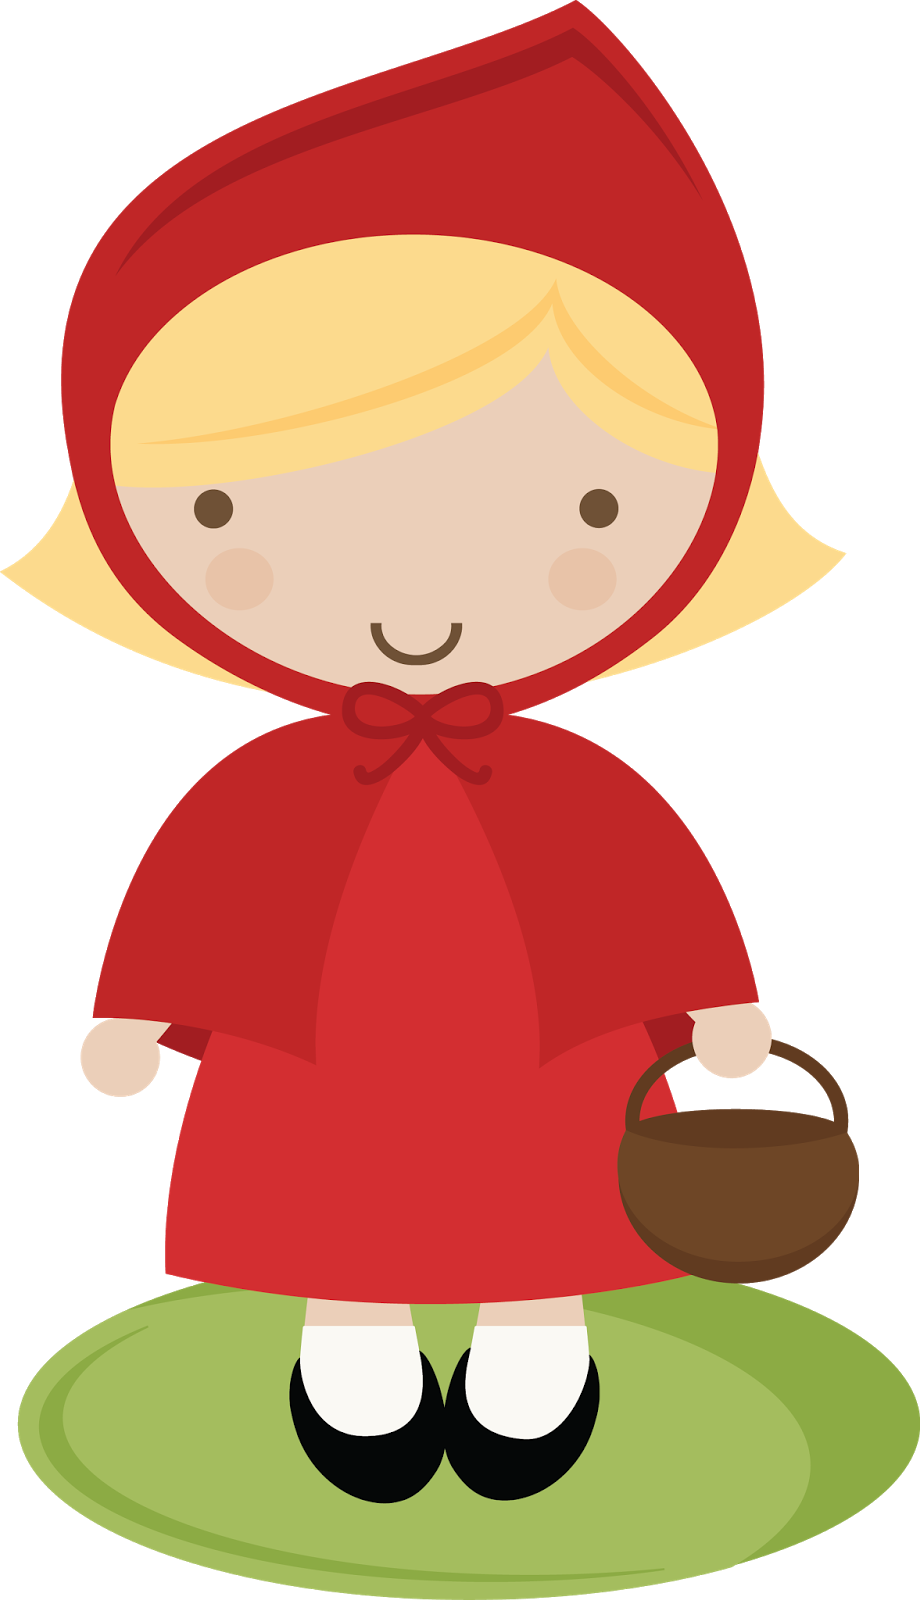 little red riding hood: Carto